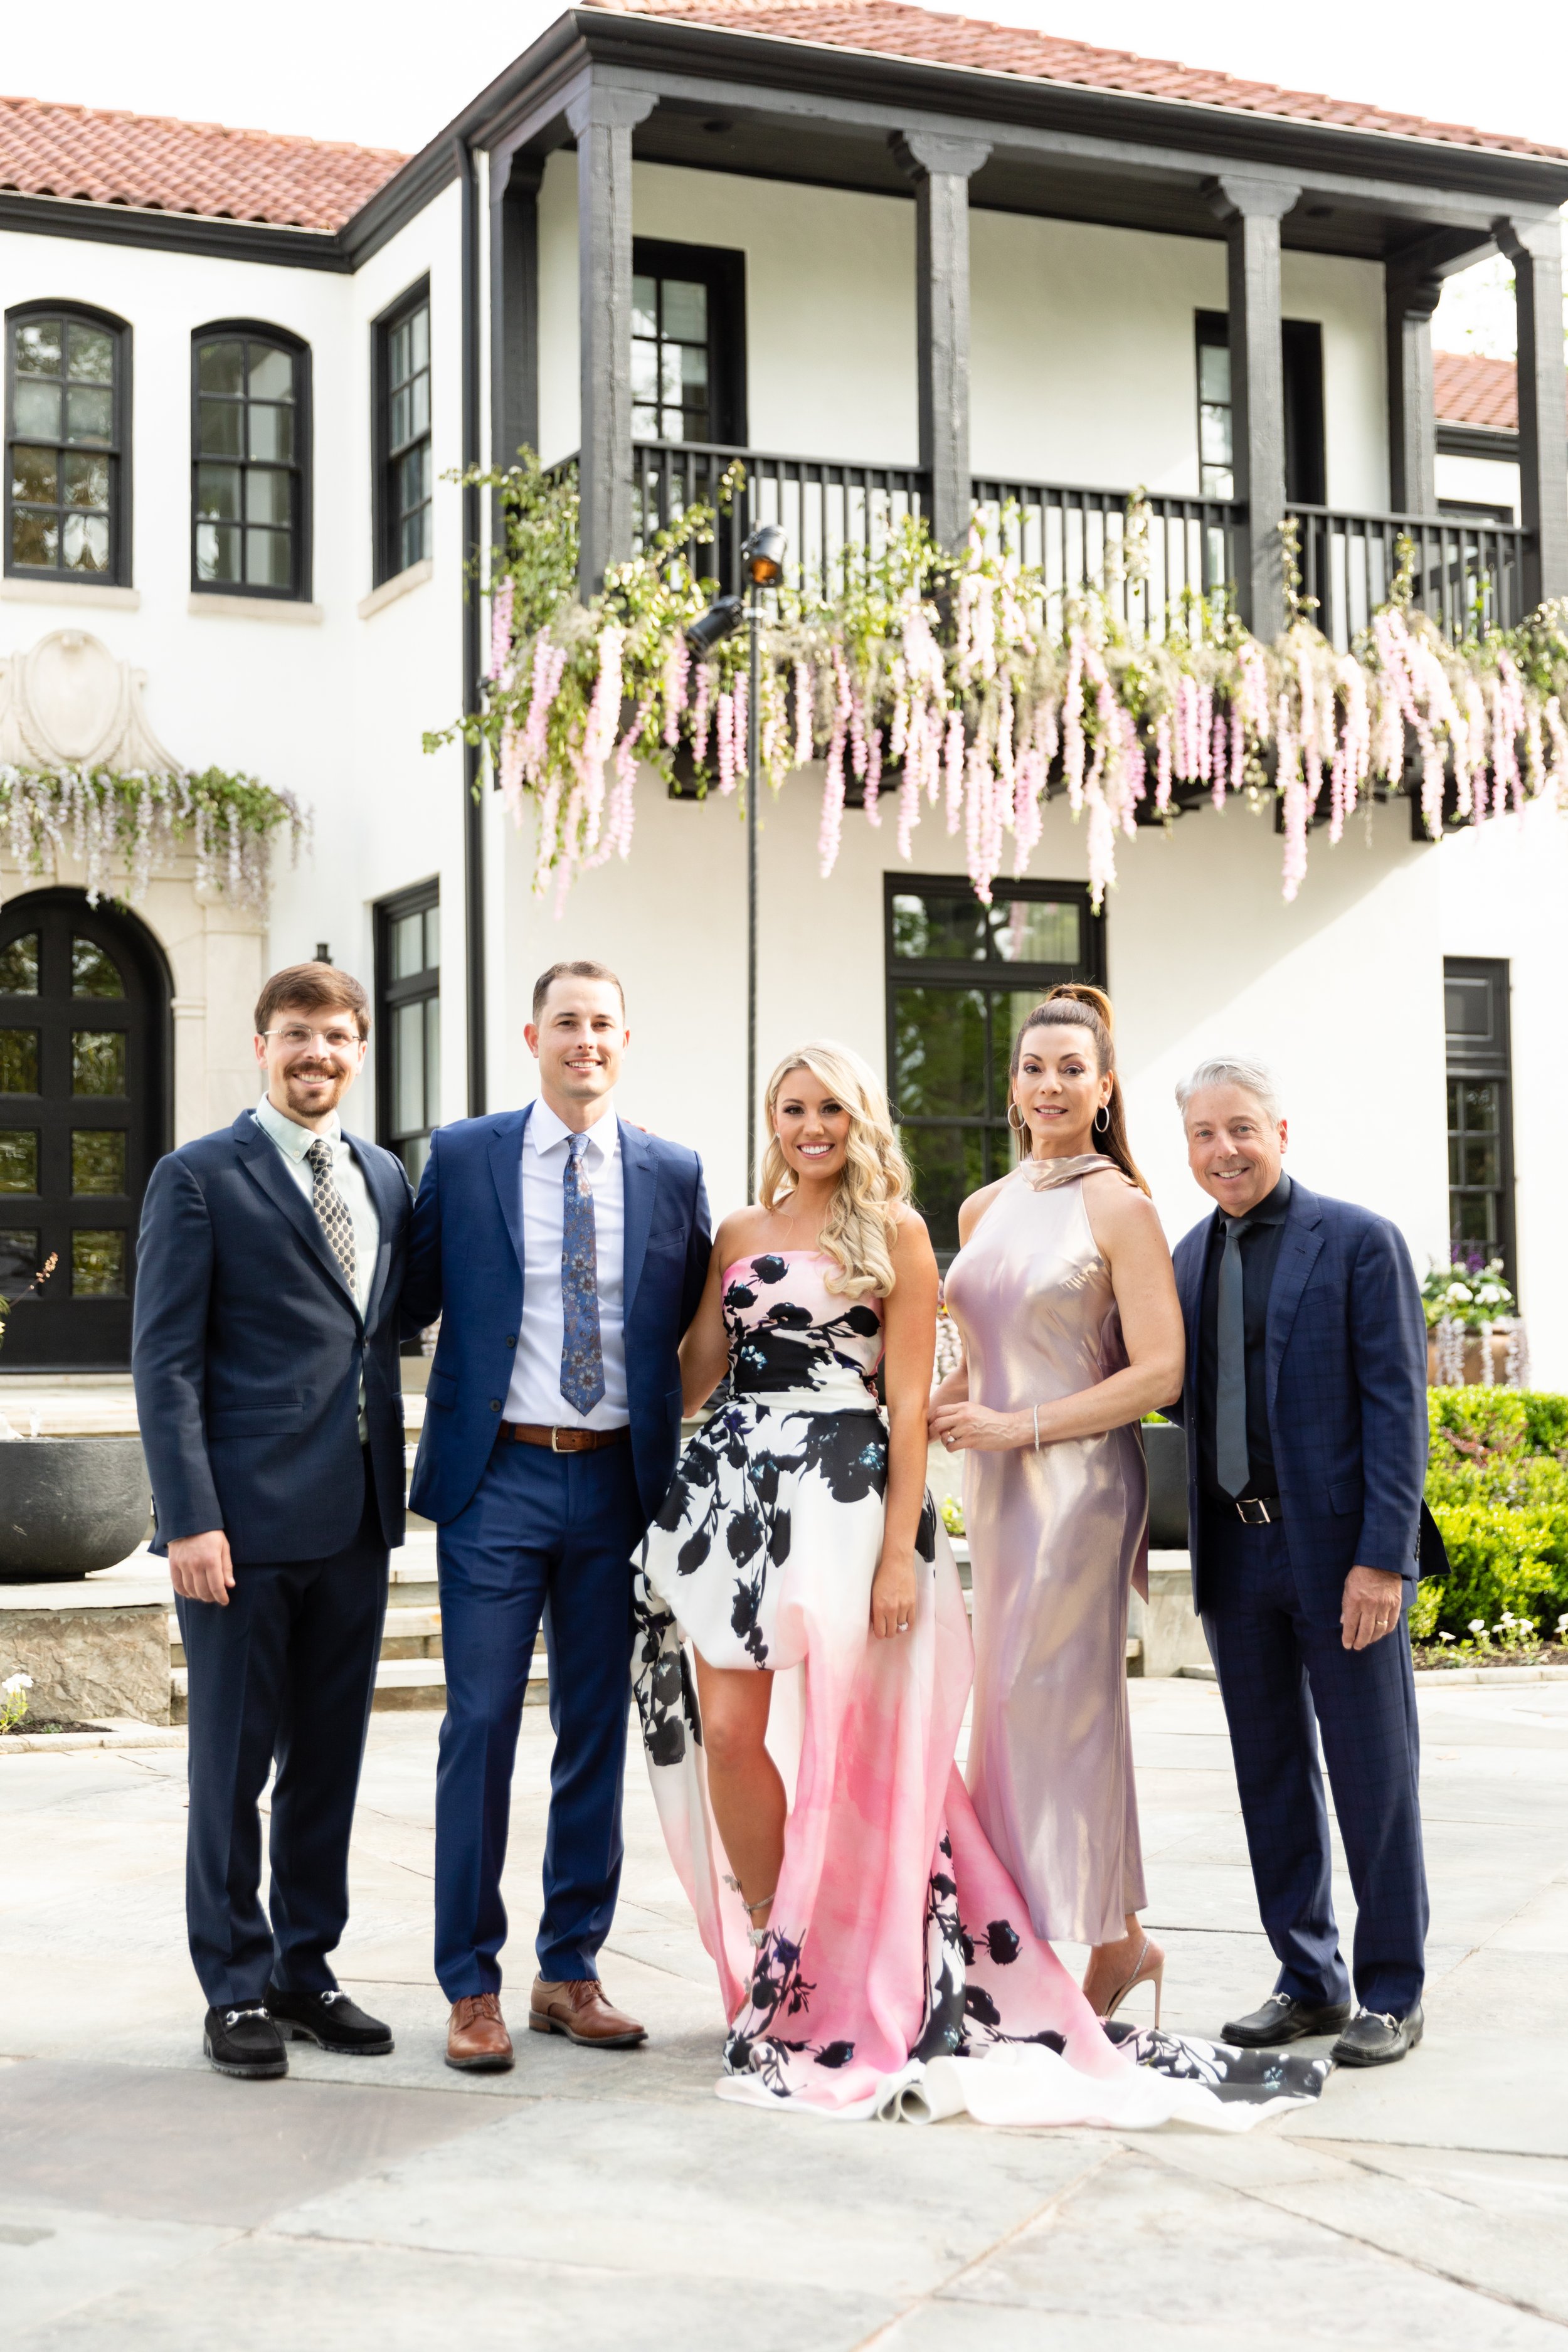 Bridgerton inspired engagement party at a private home in Nashville, TN with lush, organic floral installations of wisteria, spanish moss, and pastel blooms. Nashville wedding floral designer, Rosemary & Finch.